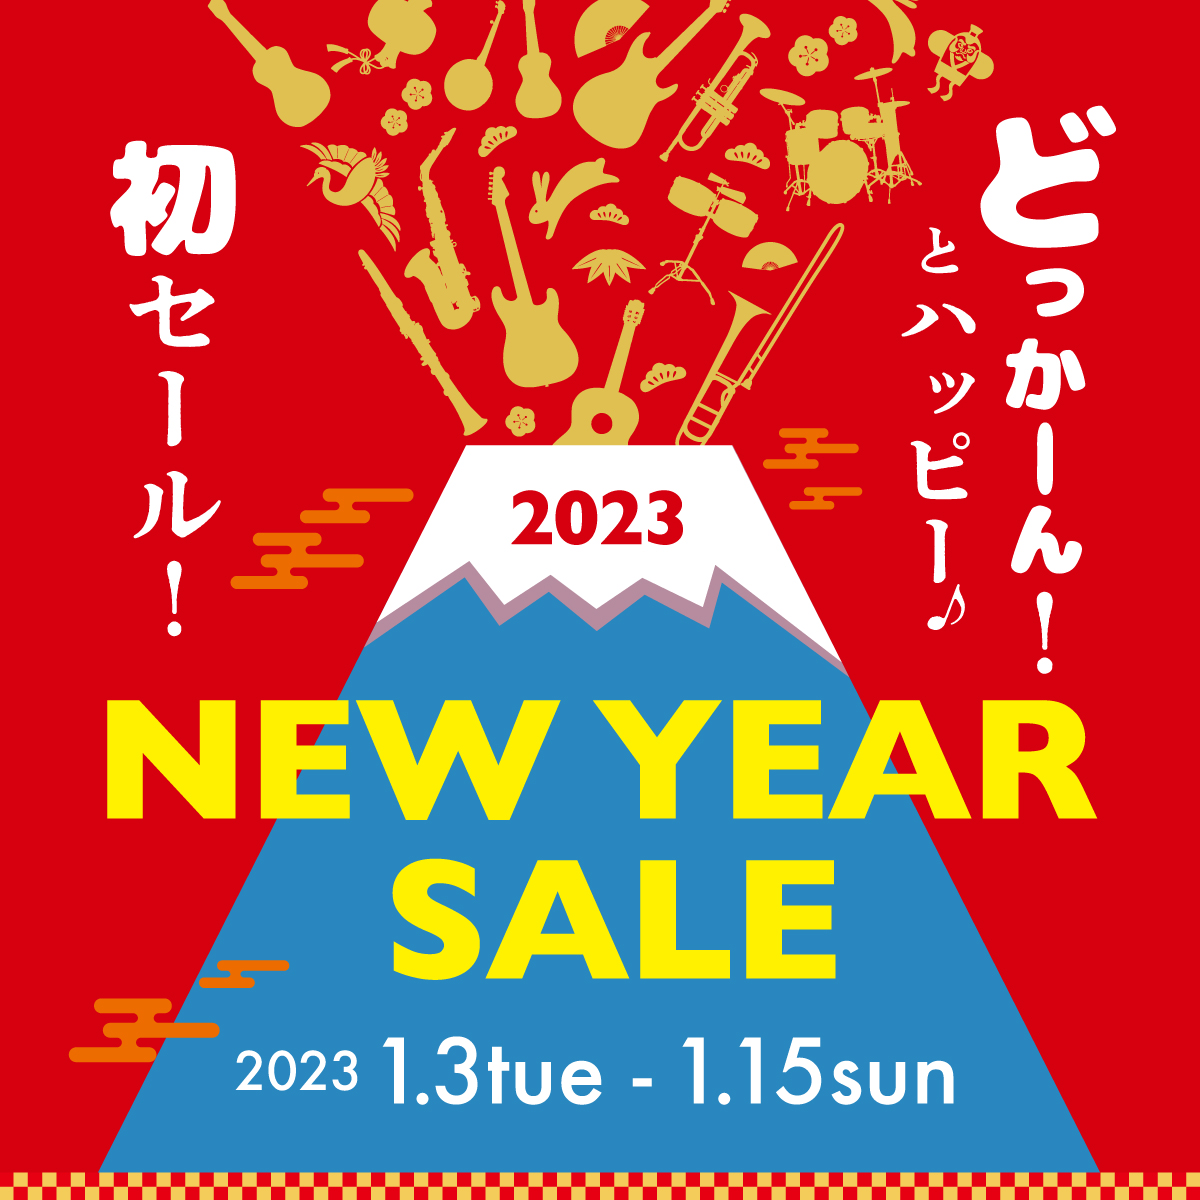 NEW YEAR SALE 2023 info